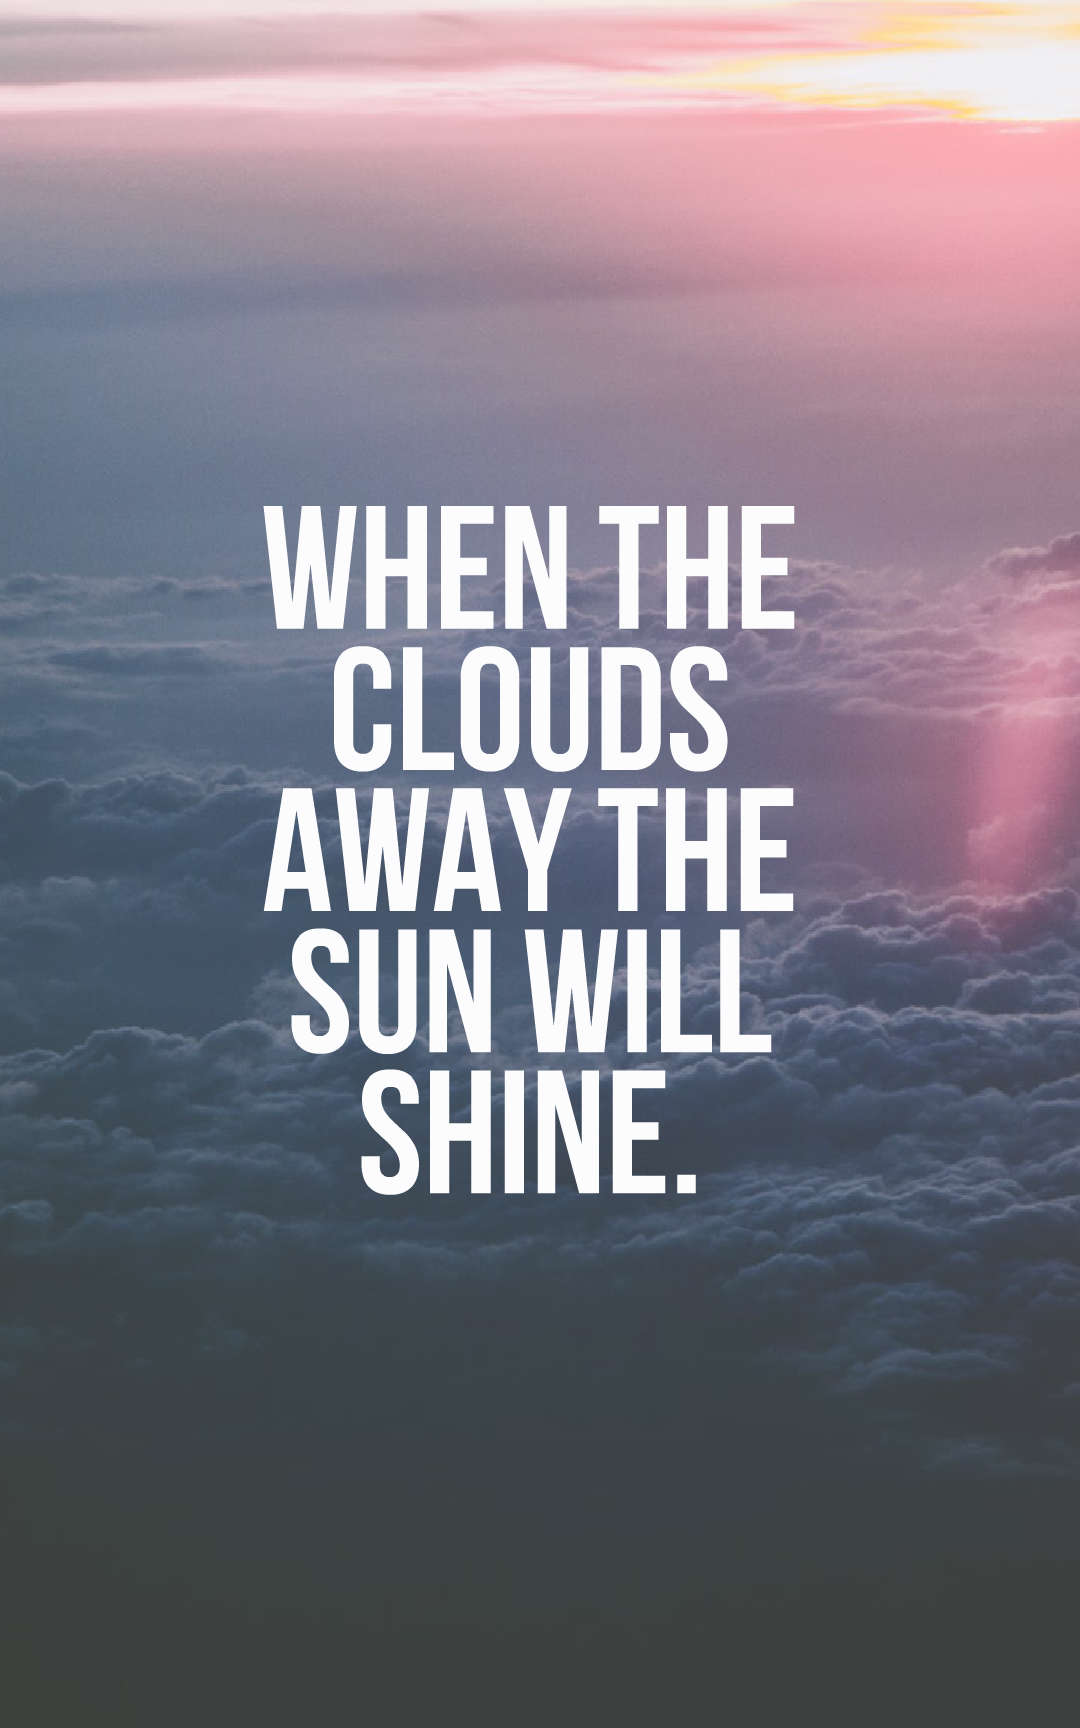 When the clouds away the sun will shine.